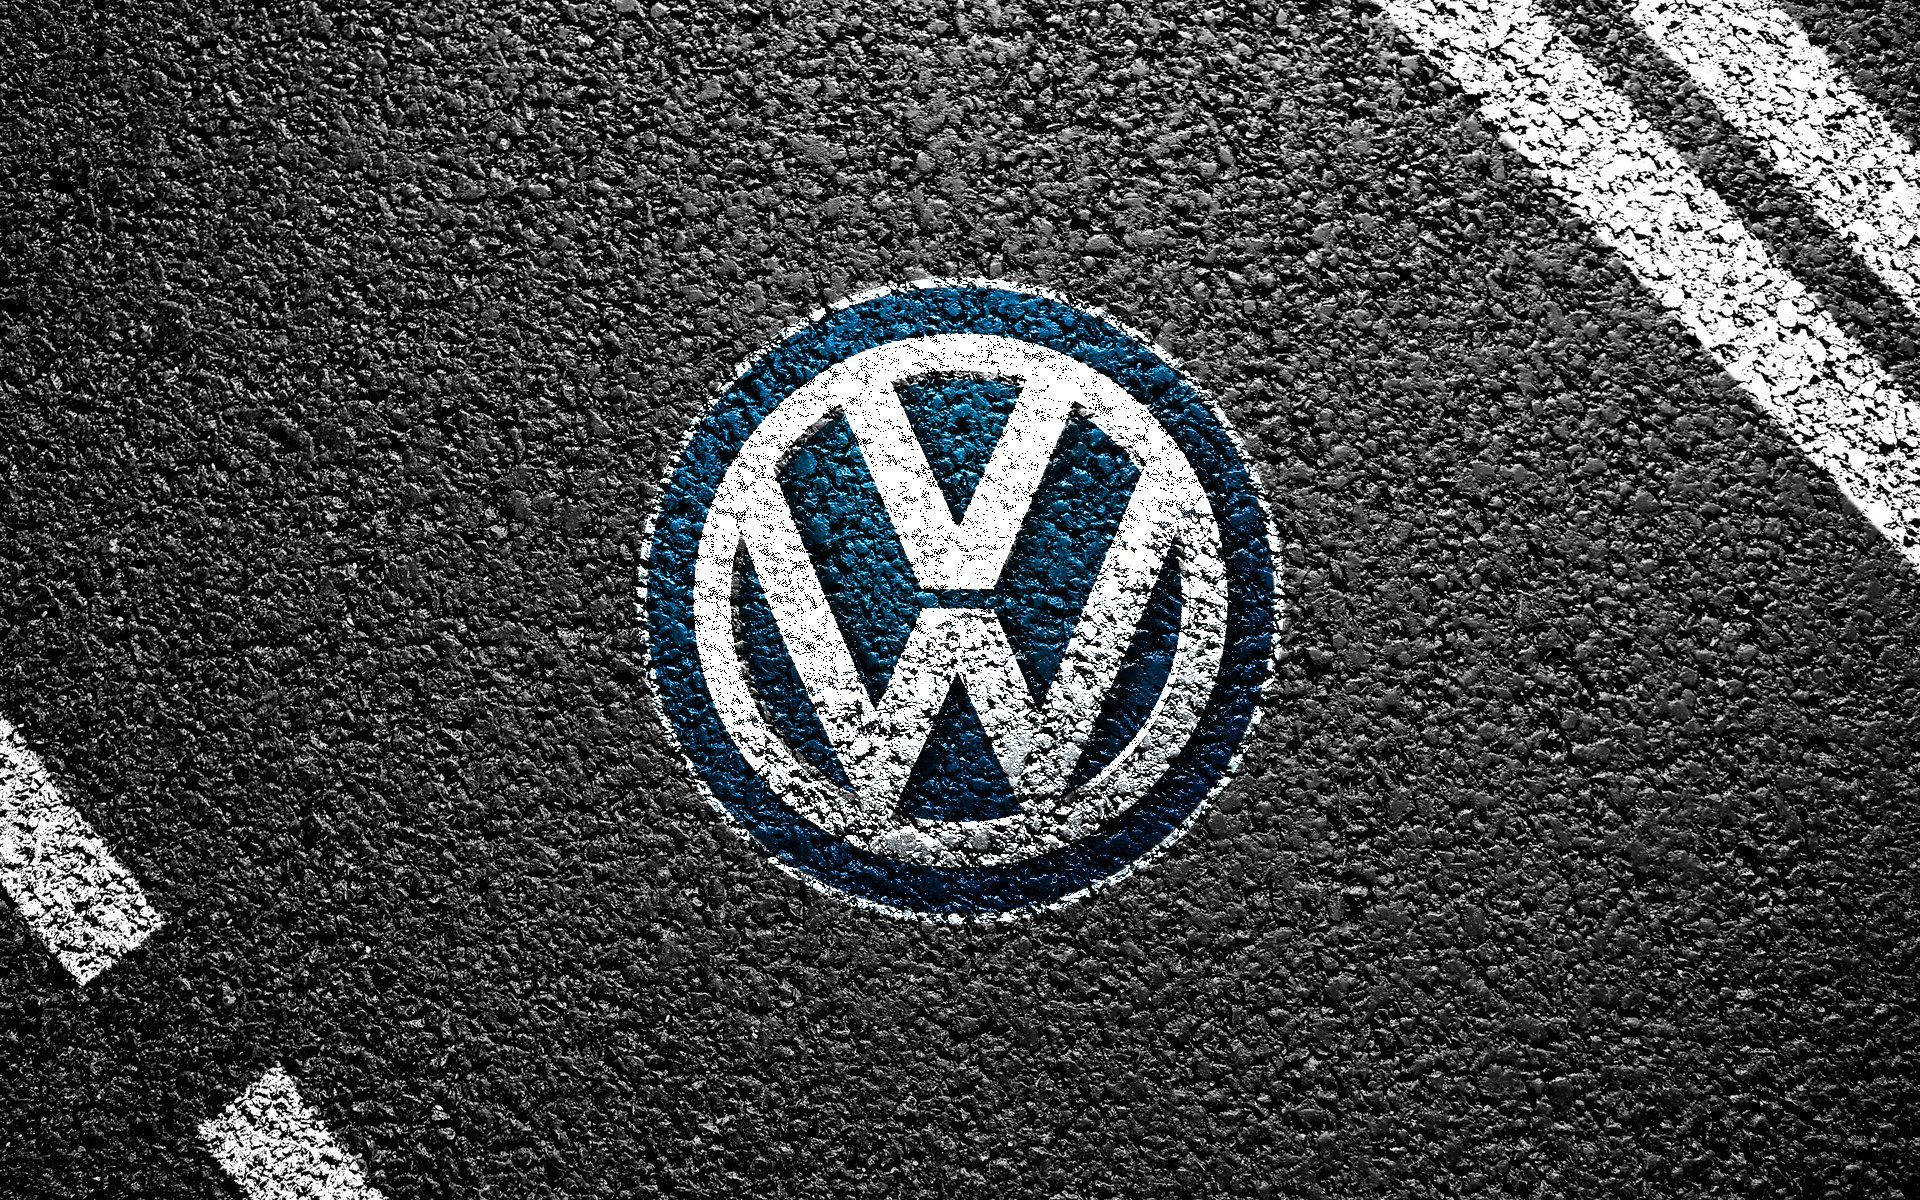 Drive a Volkswagen for efficiency and luxury. Wallpaper